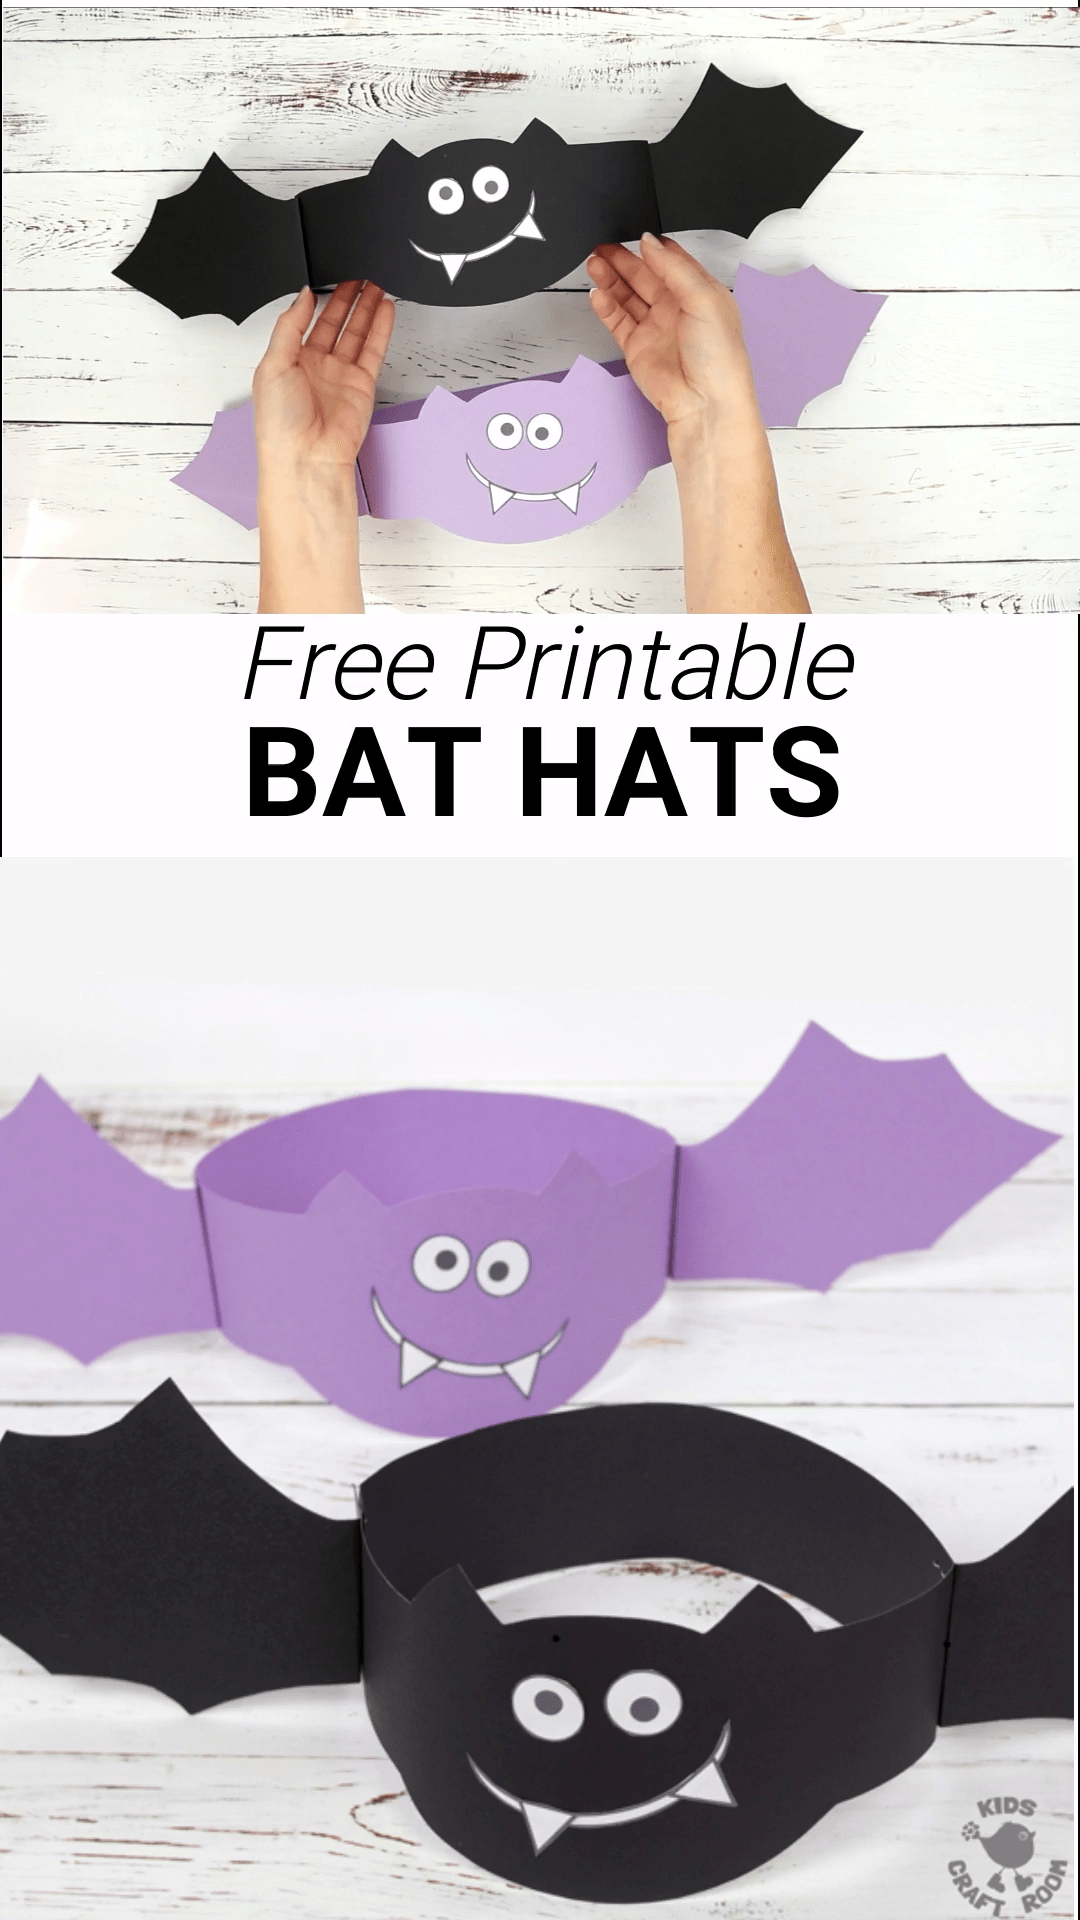 Printable Bat Hats Video Video Halloween Kids Crafts Easy Halloween Crafts For Kids Halloween Arts And Crafts